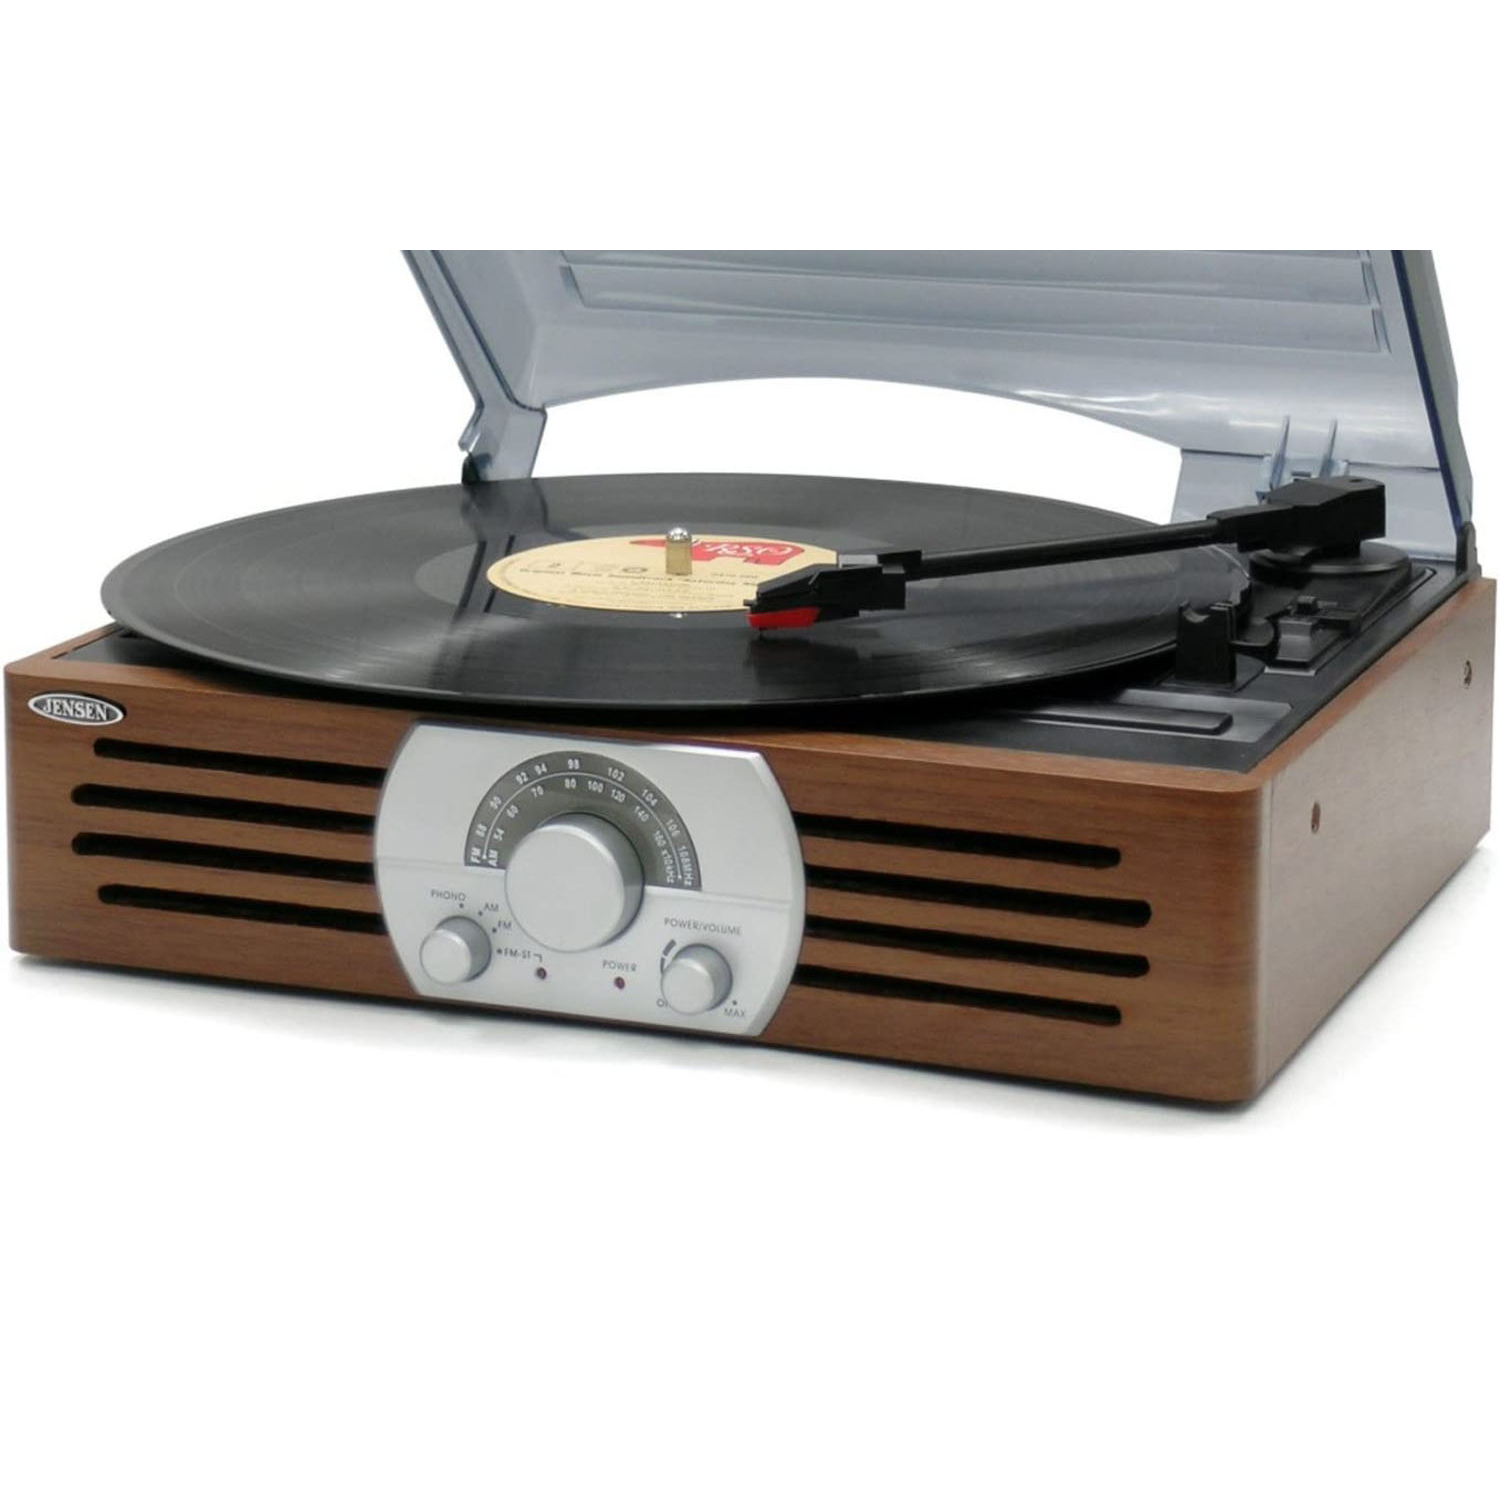 JENSEN JTA-222P Turntable with AM/FM And Pitch Control - image 5 of 6